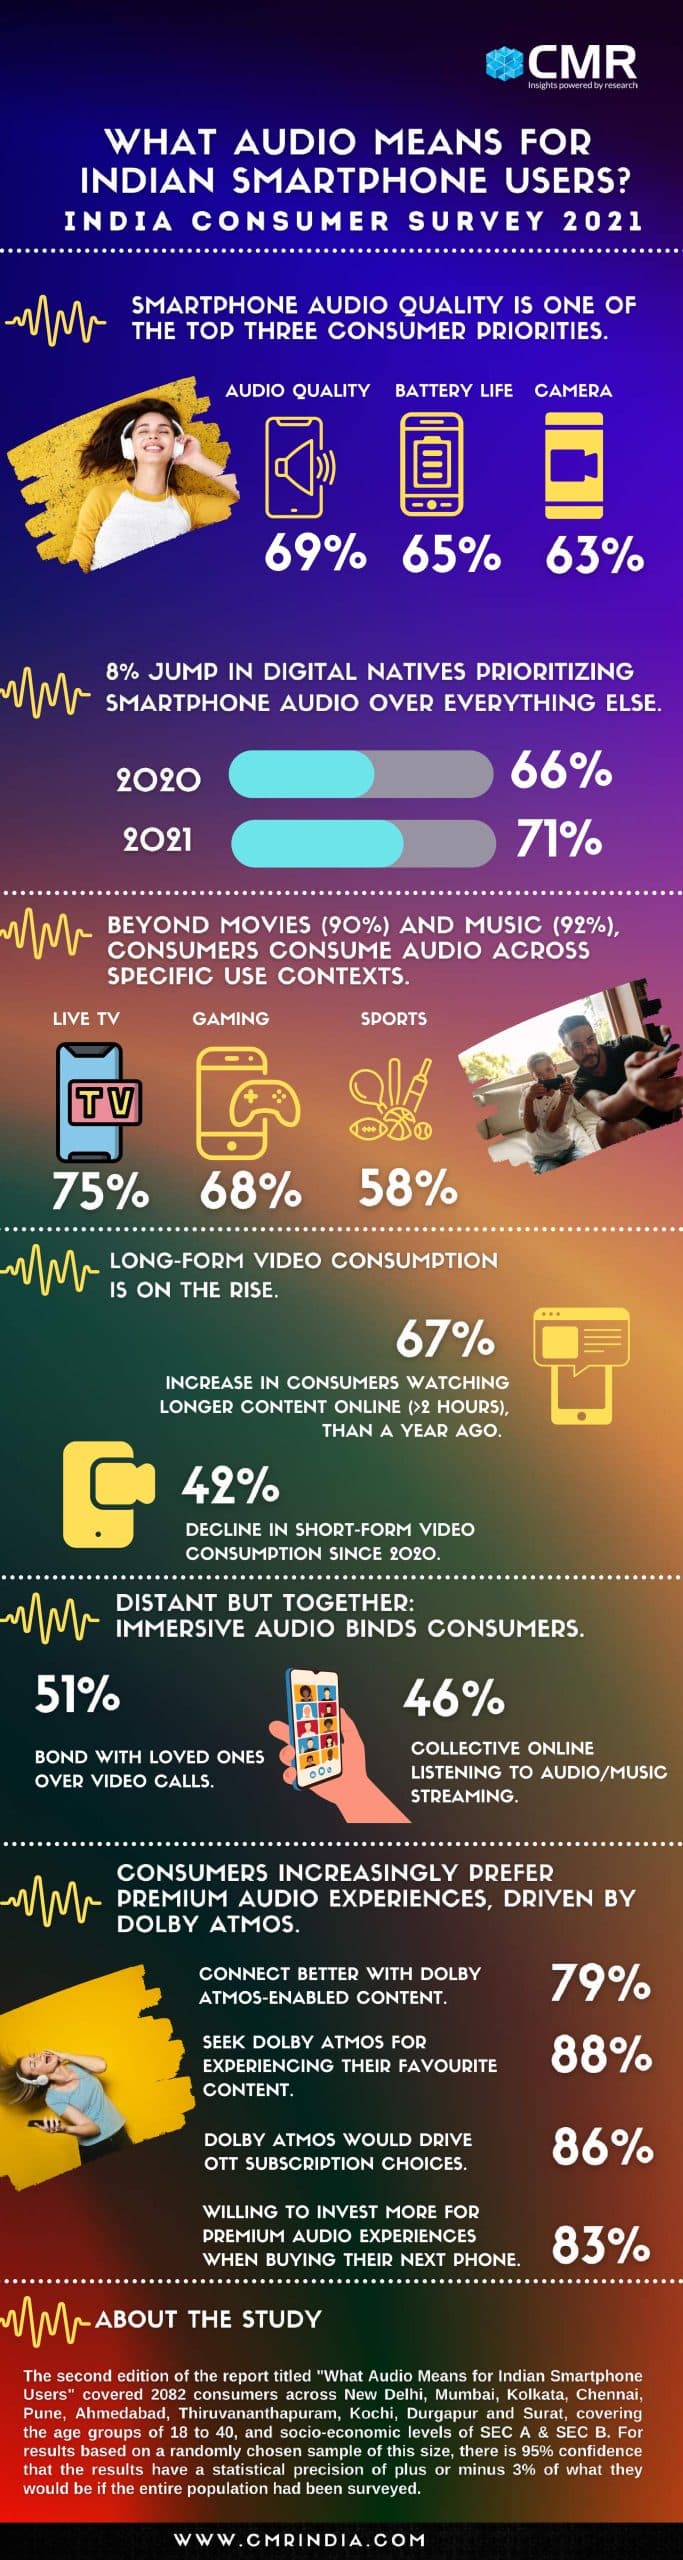  CMR Study reveals Indian consumers continue to prioritize audio quality while purchasing smartphones